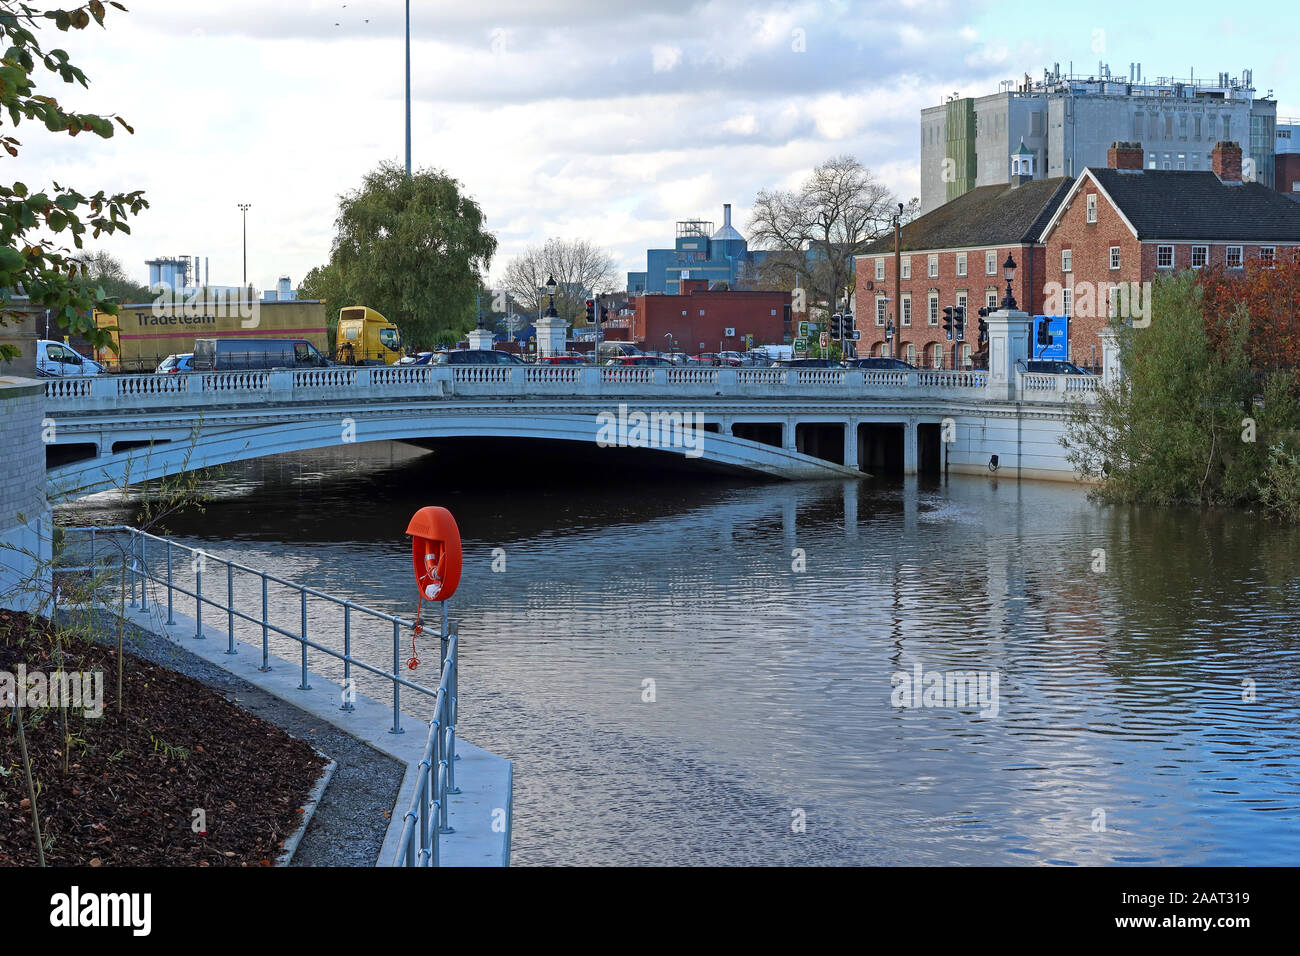 High water at Bridgefoot Warrington Oct 2019, WA1 1WA - High Tide and flooding of the River Mersey Crossing, Cheshire, North West England, UK Stock Photo